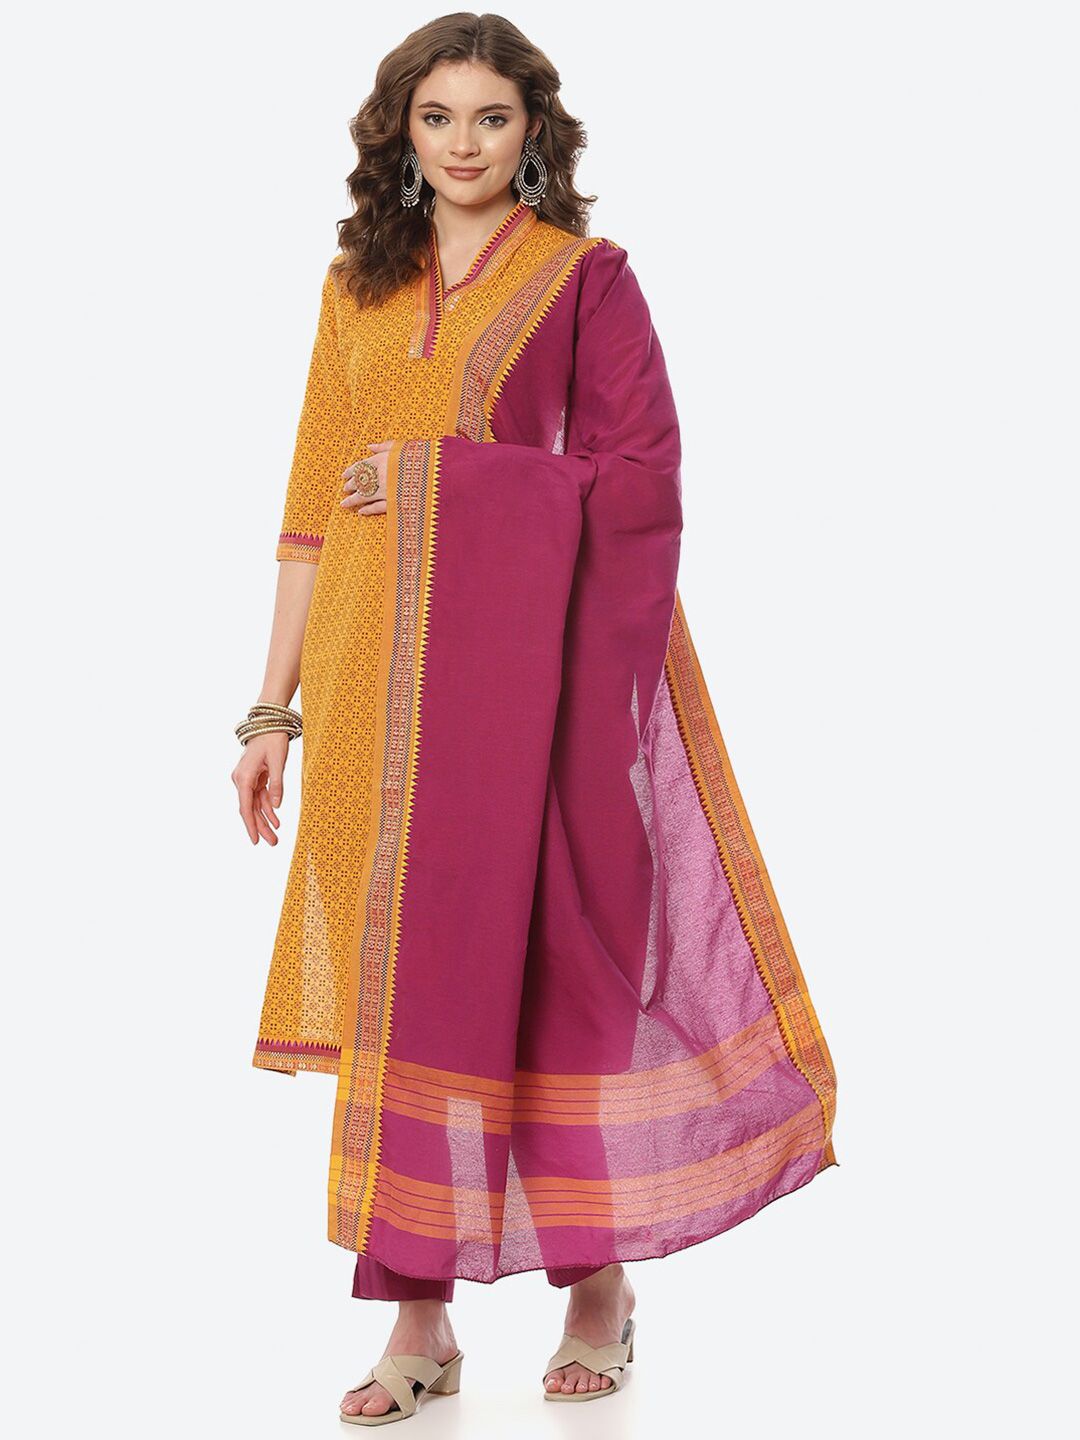 Biba Yellow & Pink Unstitched Dress Material Price in India